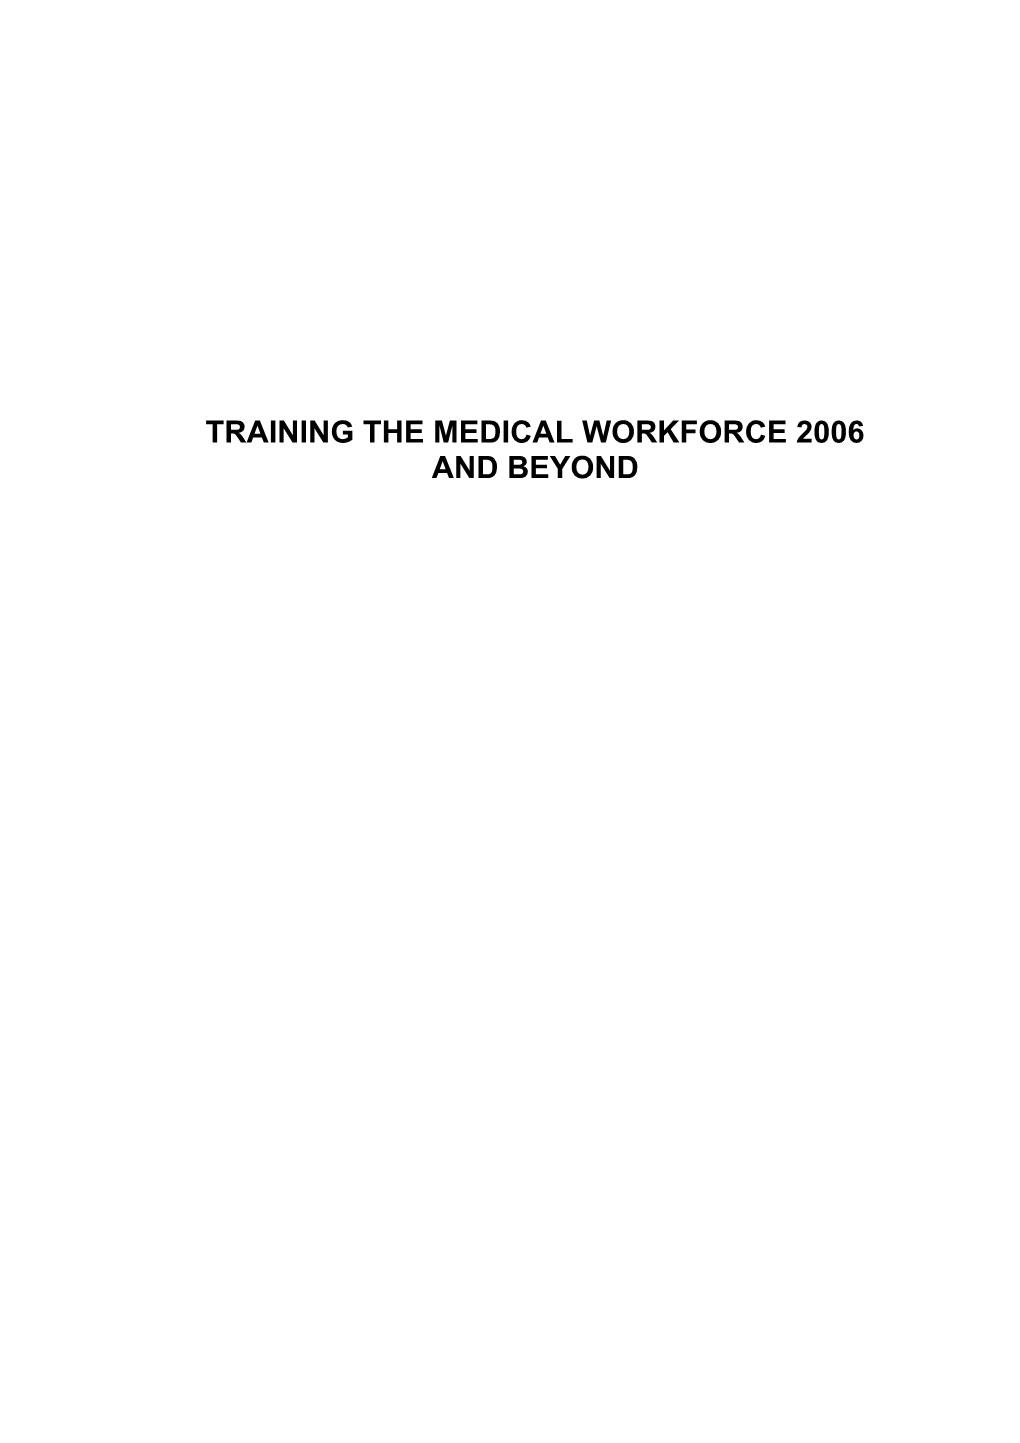 Training the Medical Workforce 2006 and Beyond